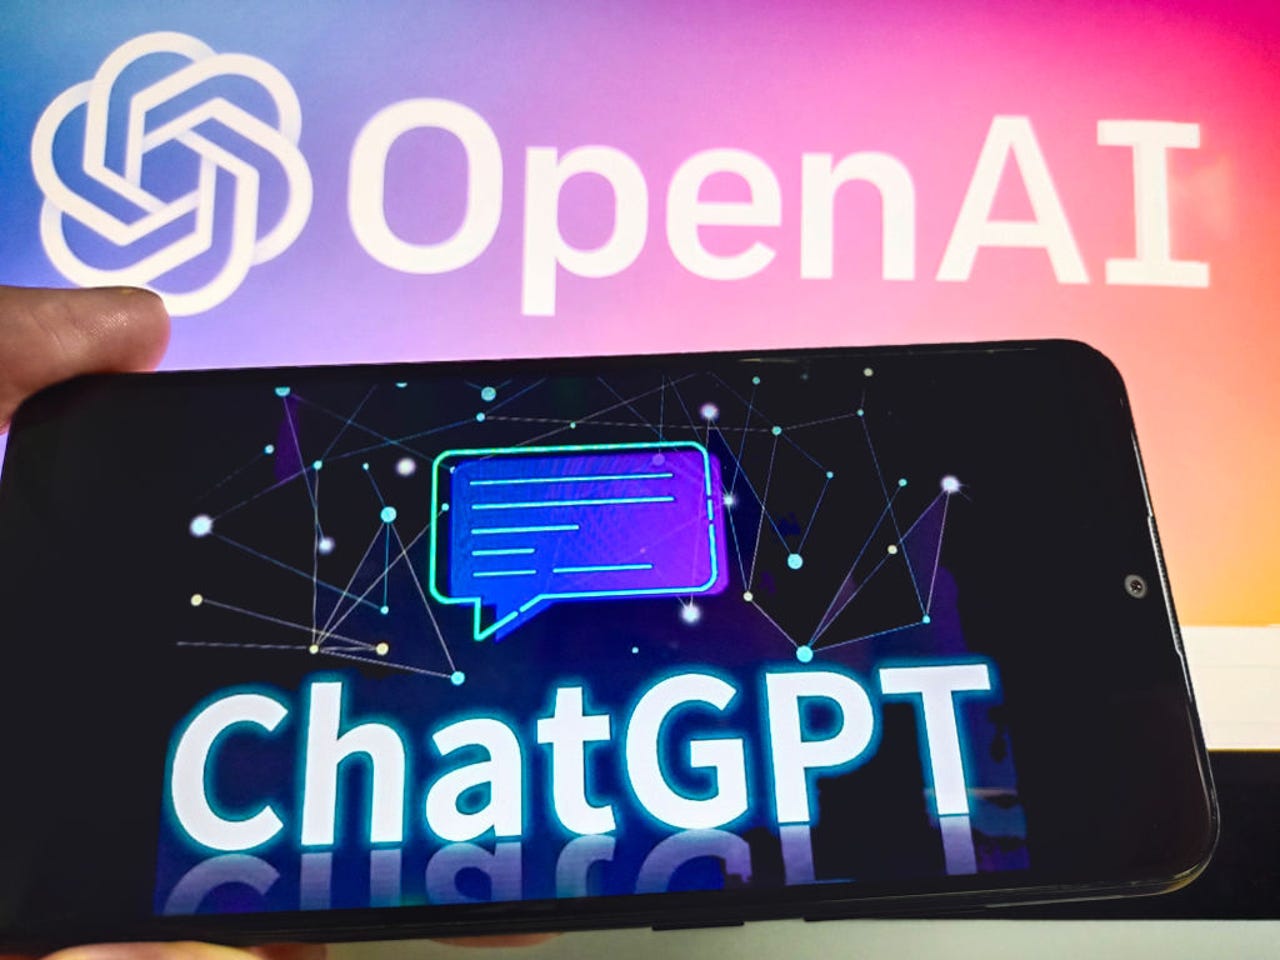 OpenAI in background and ChatGPT logo on phone